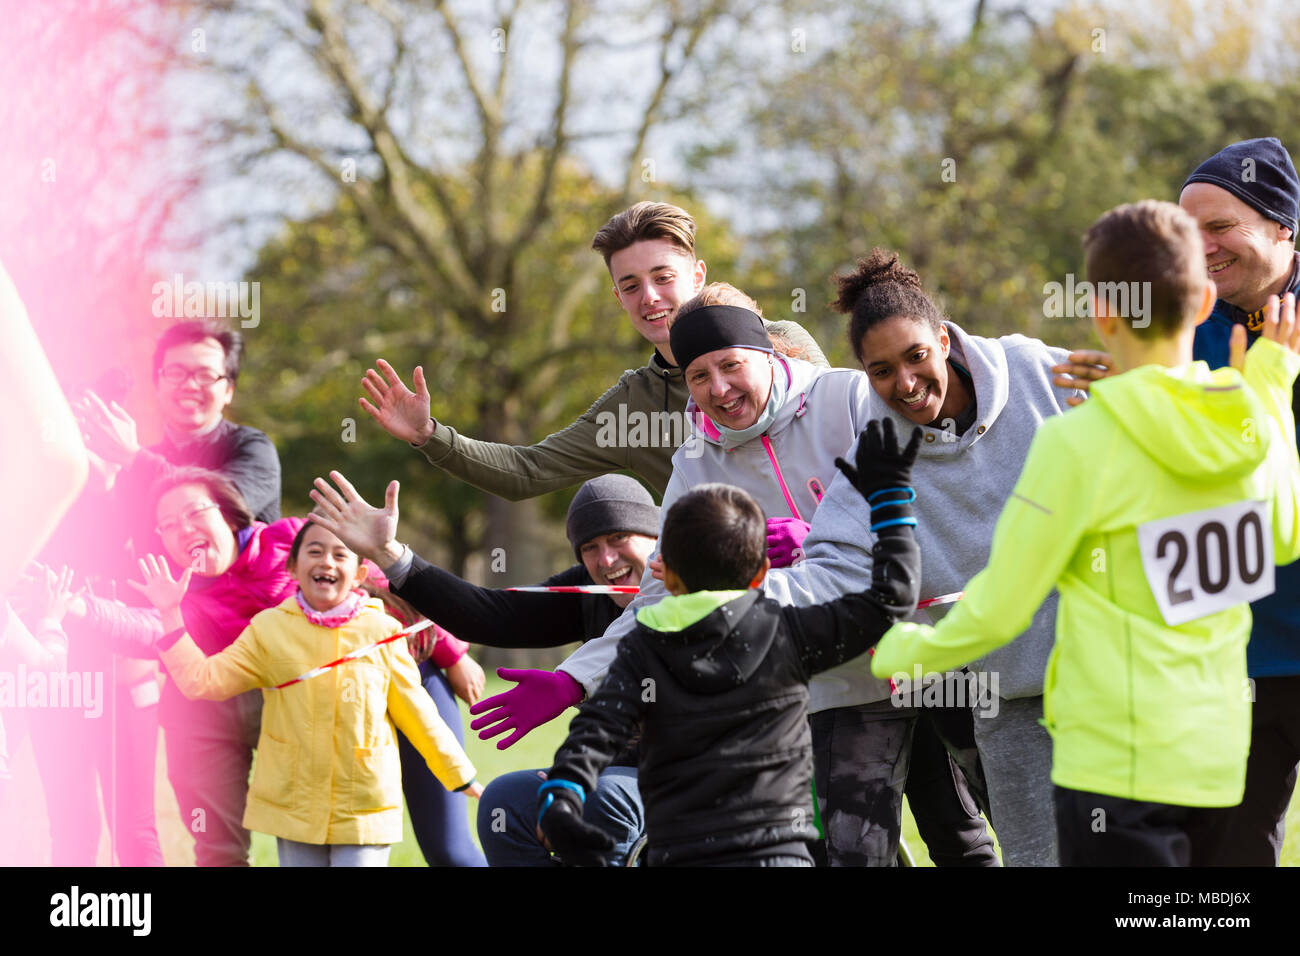 Spectators high-fiving runners at charity run in park Stock Photo